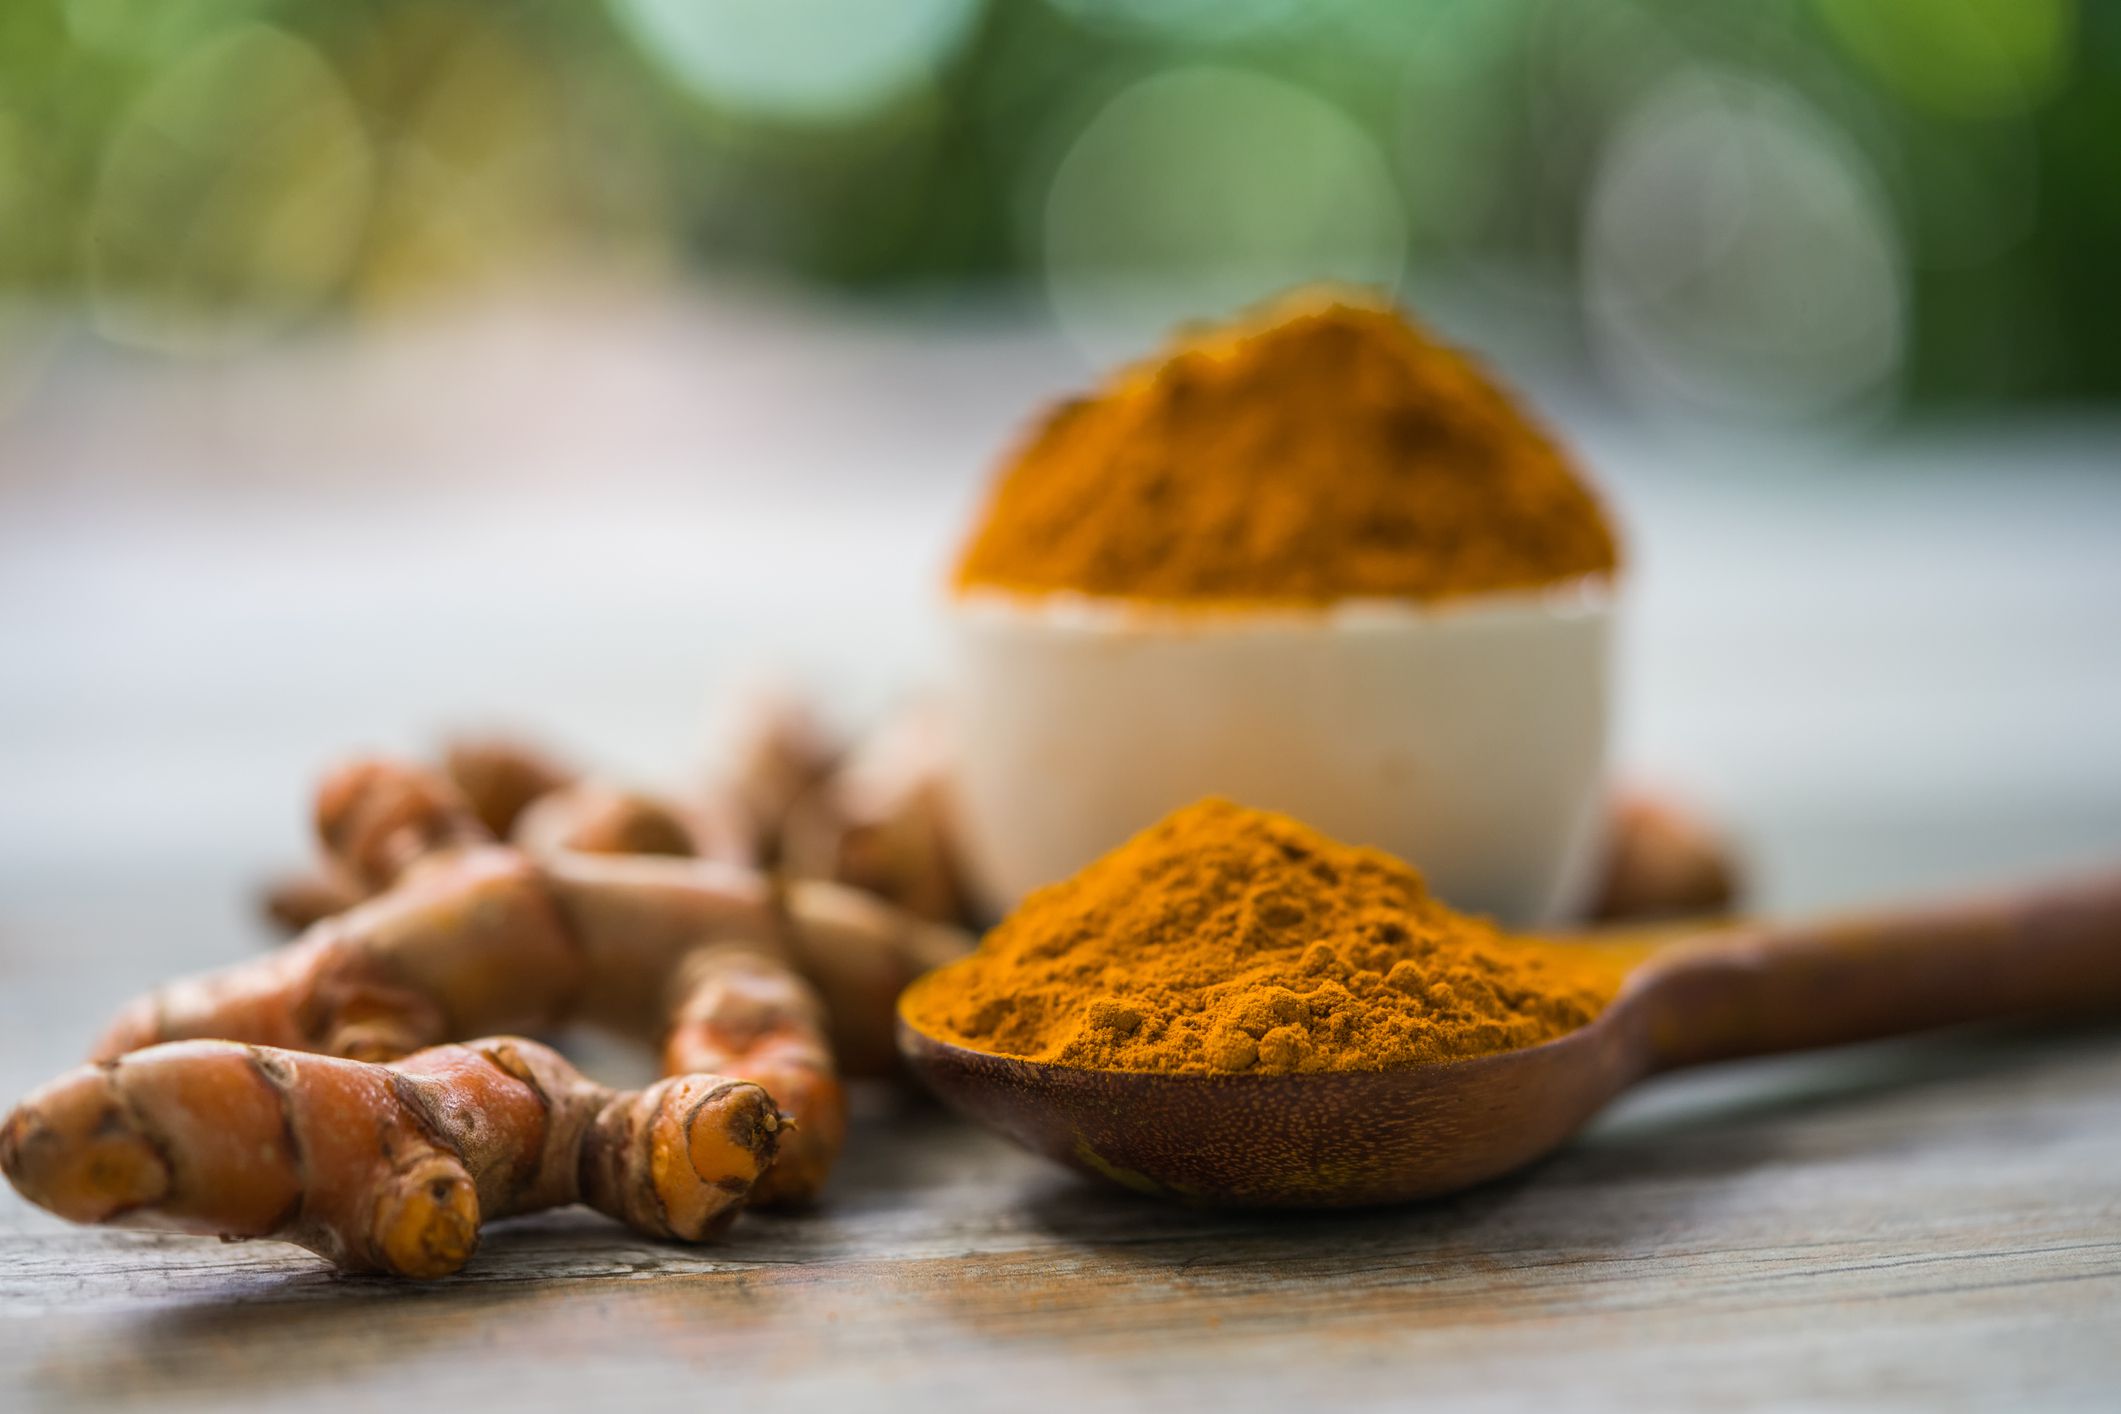 How Could Turmeric Prevent or Treat Prostate Cancer?